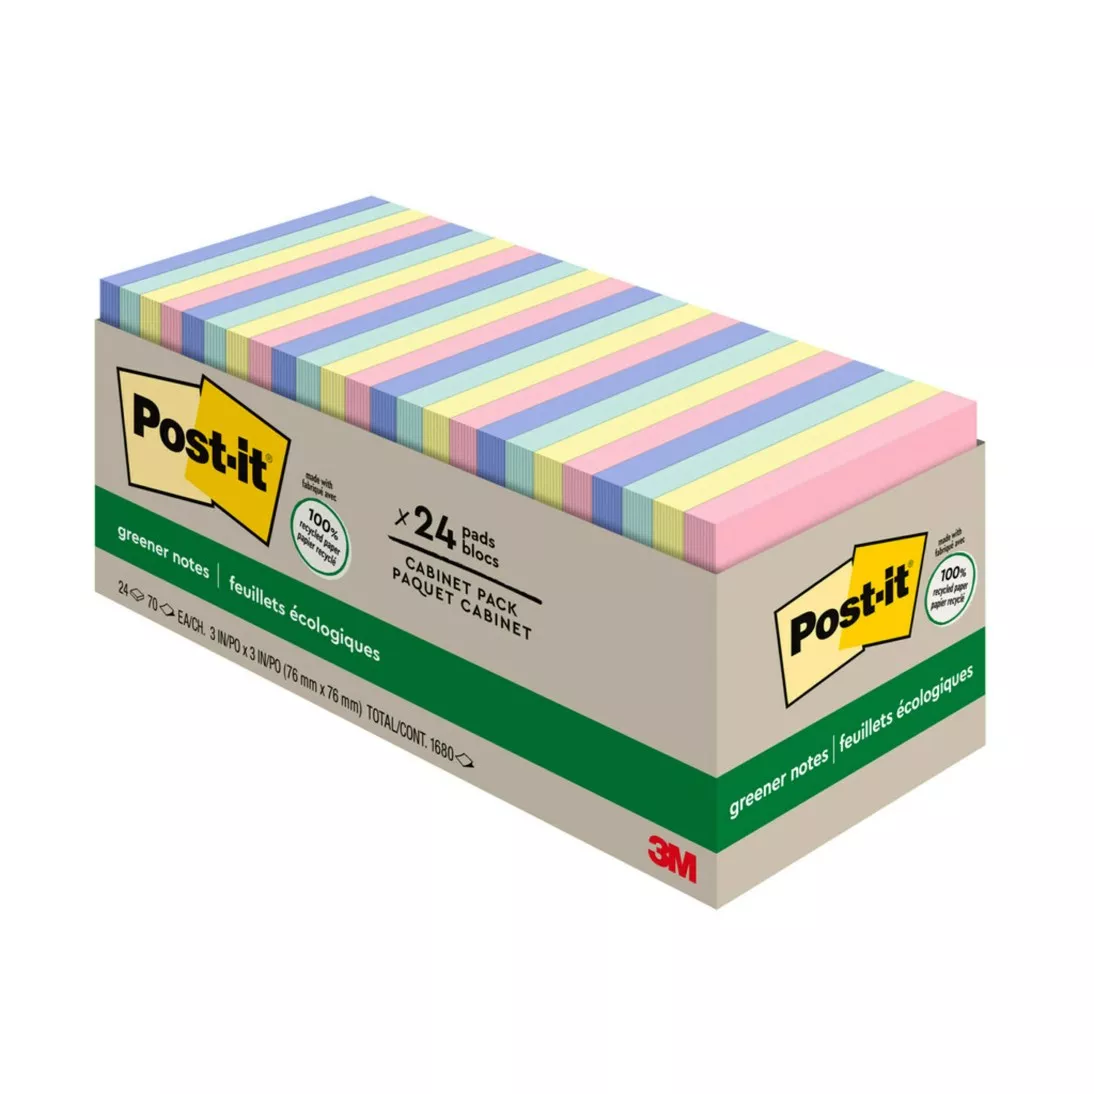 Post-it® Notes 654R-24CP-AP, 3 in x 3 in (76 mm x 76 mm) Helsinki colors
Cabinet pack